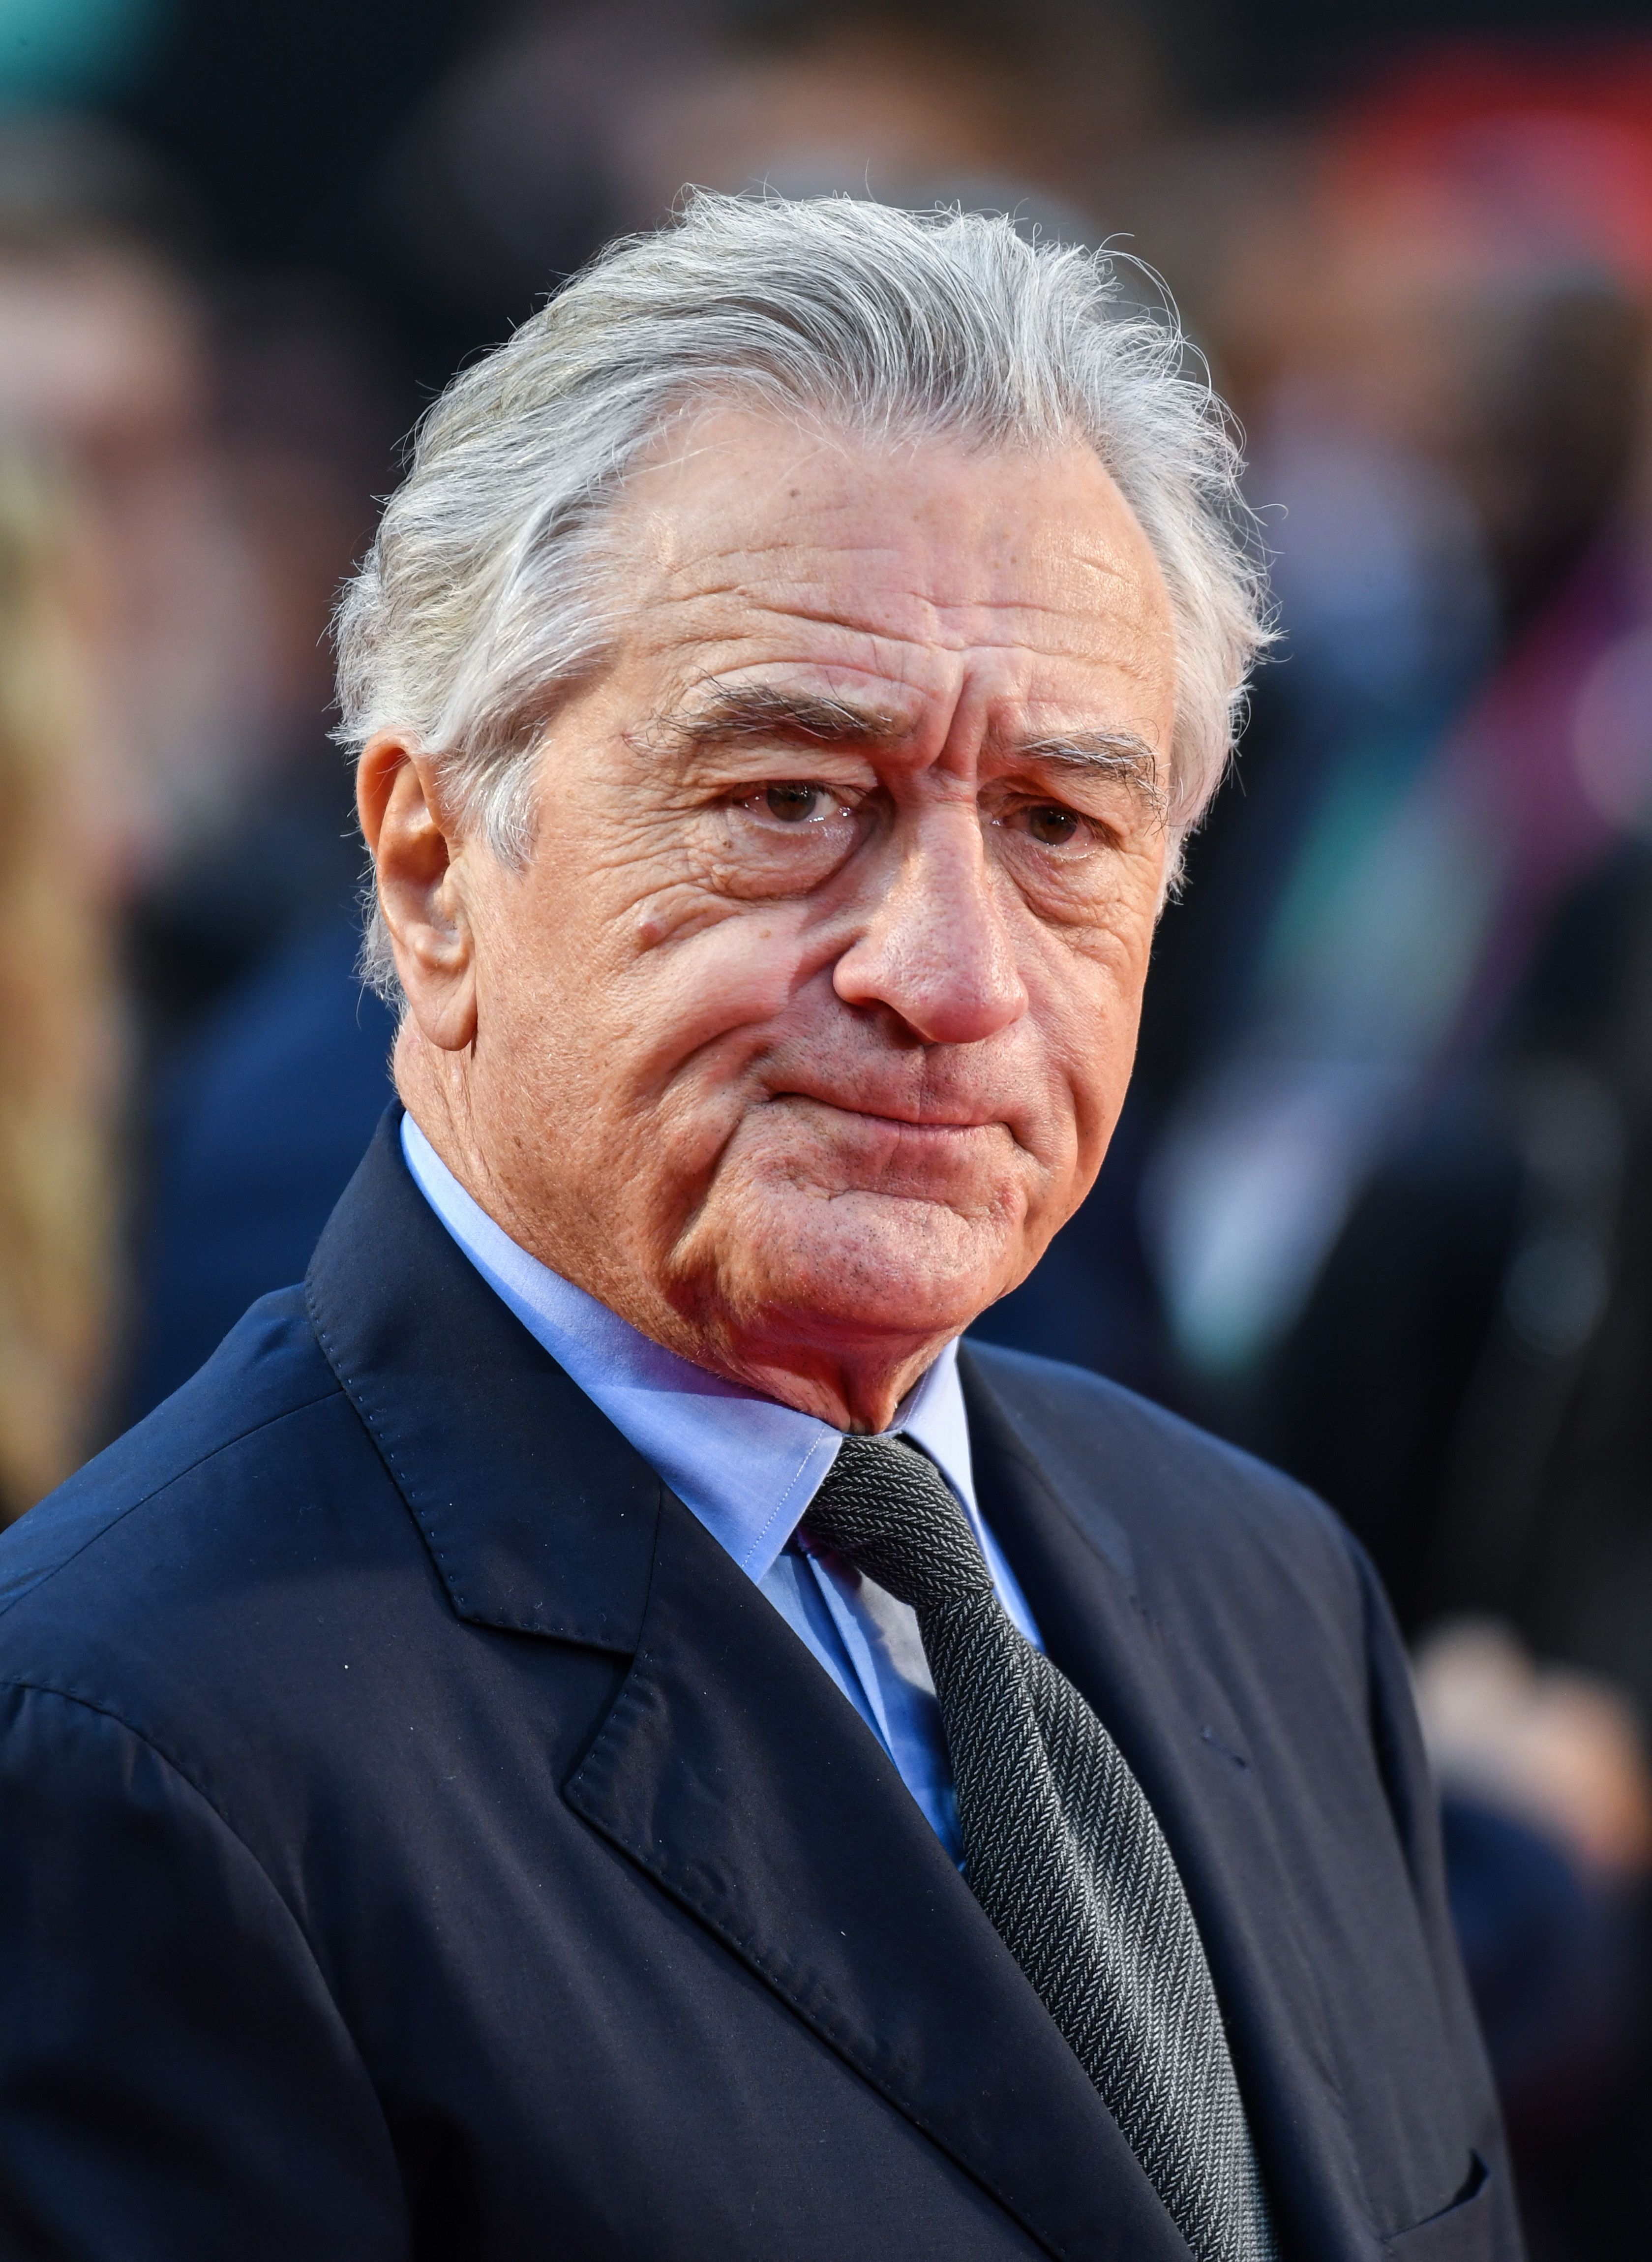 Robert De Niro during the 63rd BFI London Film Festival at the Odeon Luxe Leicester Square on October 13, 2019, in London, England. | Source: Getty Images